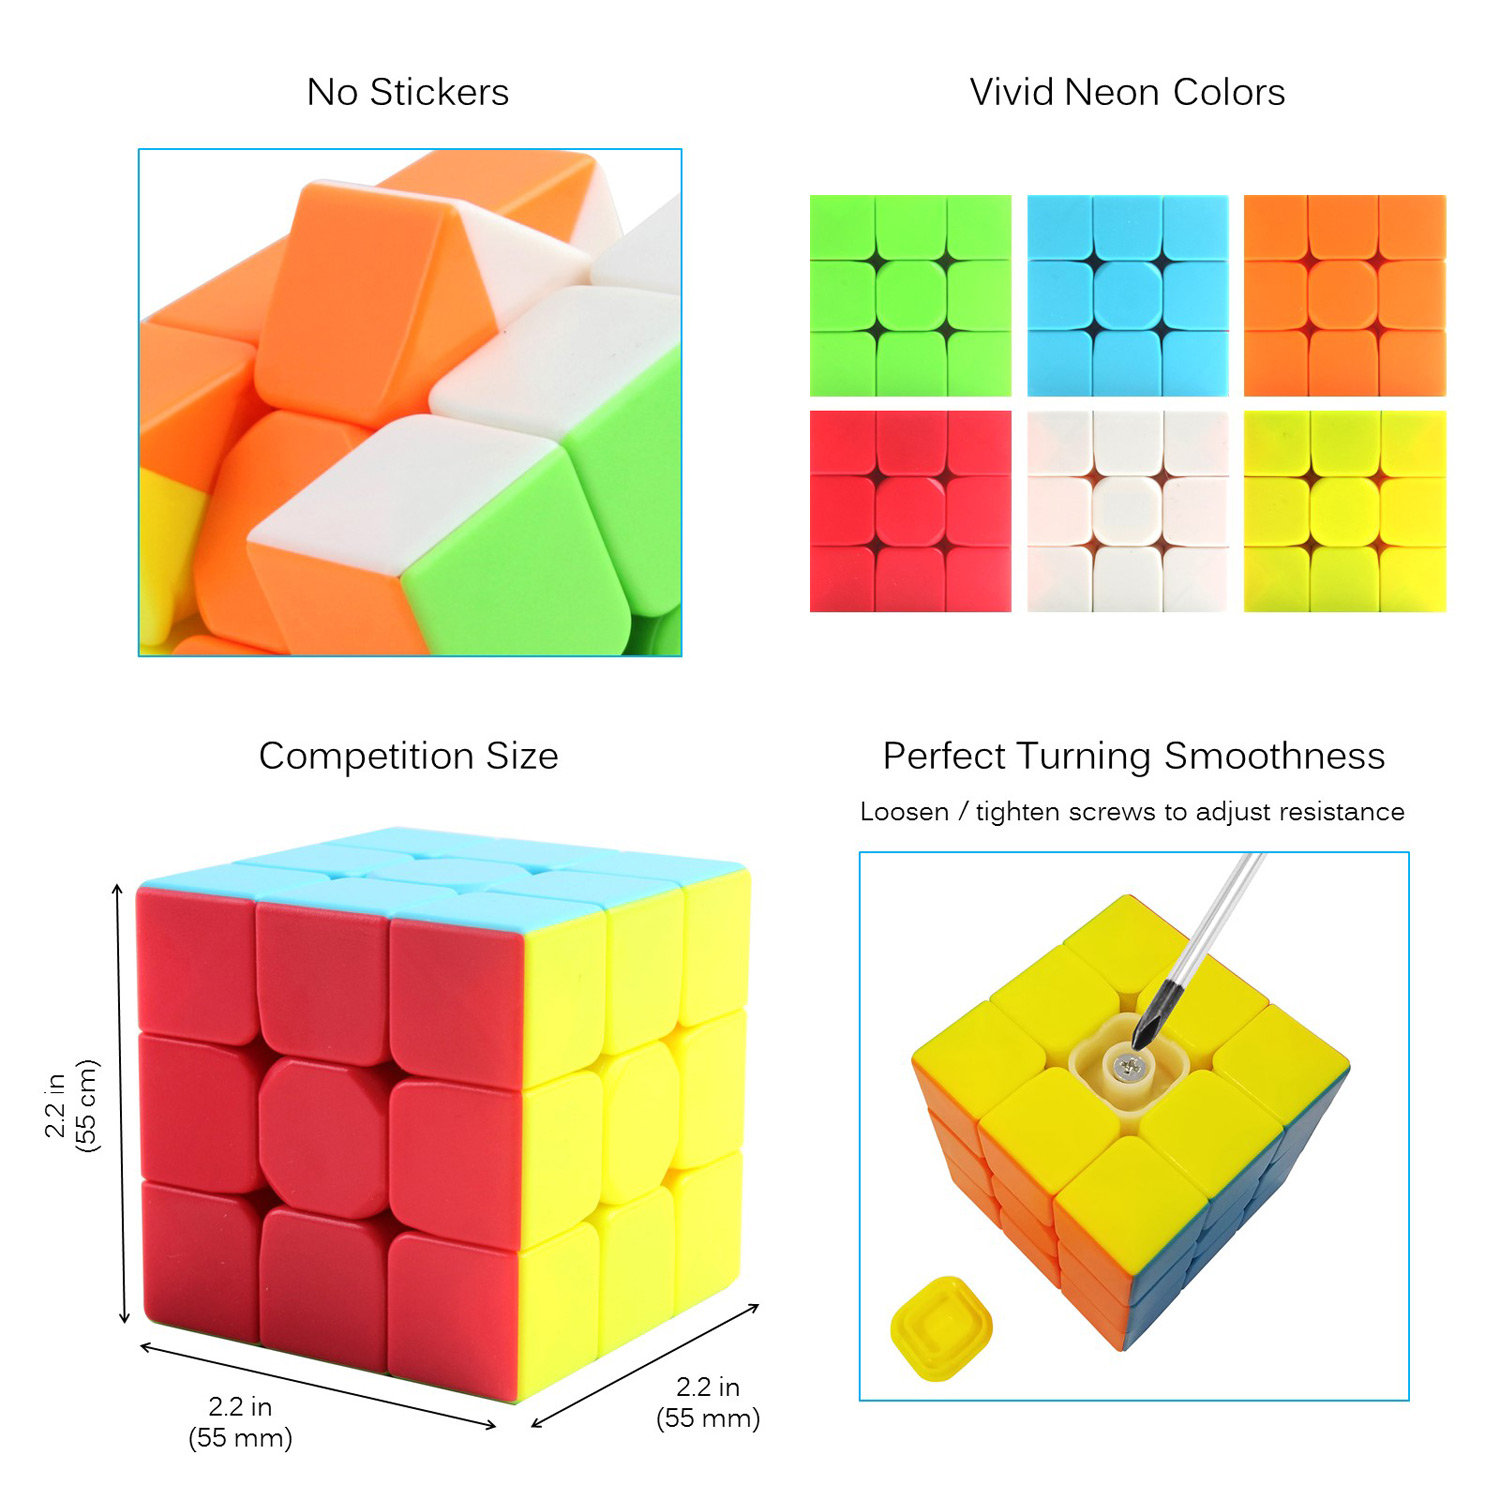 Speed Cube Turns Quick Rubiks Smooth Play Rubix Solid Durable Stickerless Smart Gaming Puzzle Modern Colors IQ Tester Magic Anti Stress Anti-anxiety Adults Kids Brain Teaser Toy TN-40